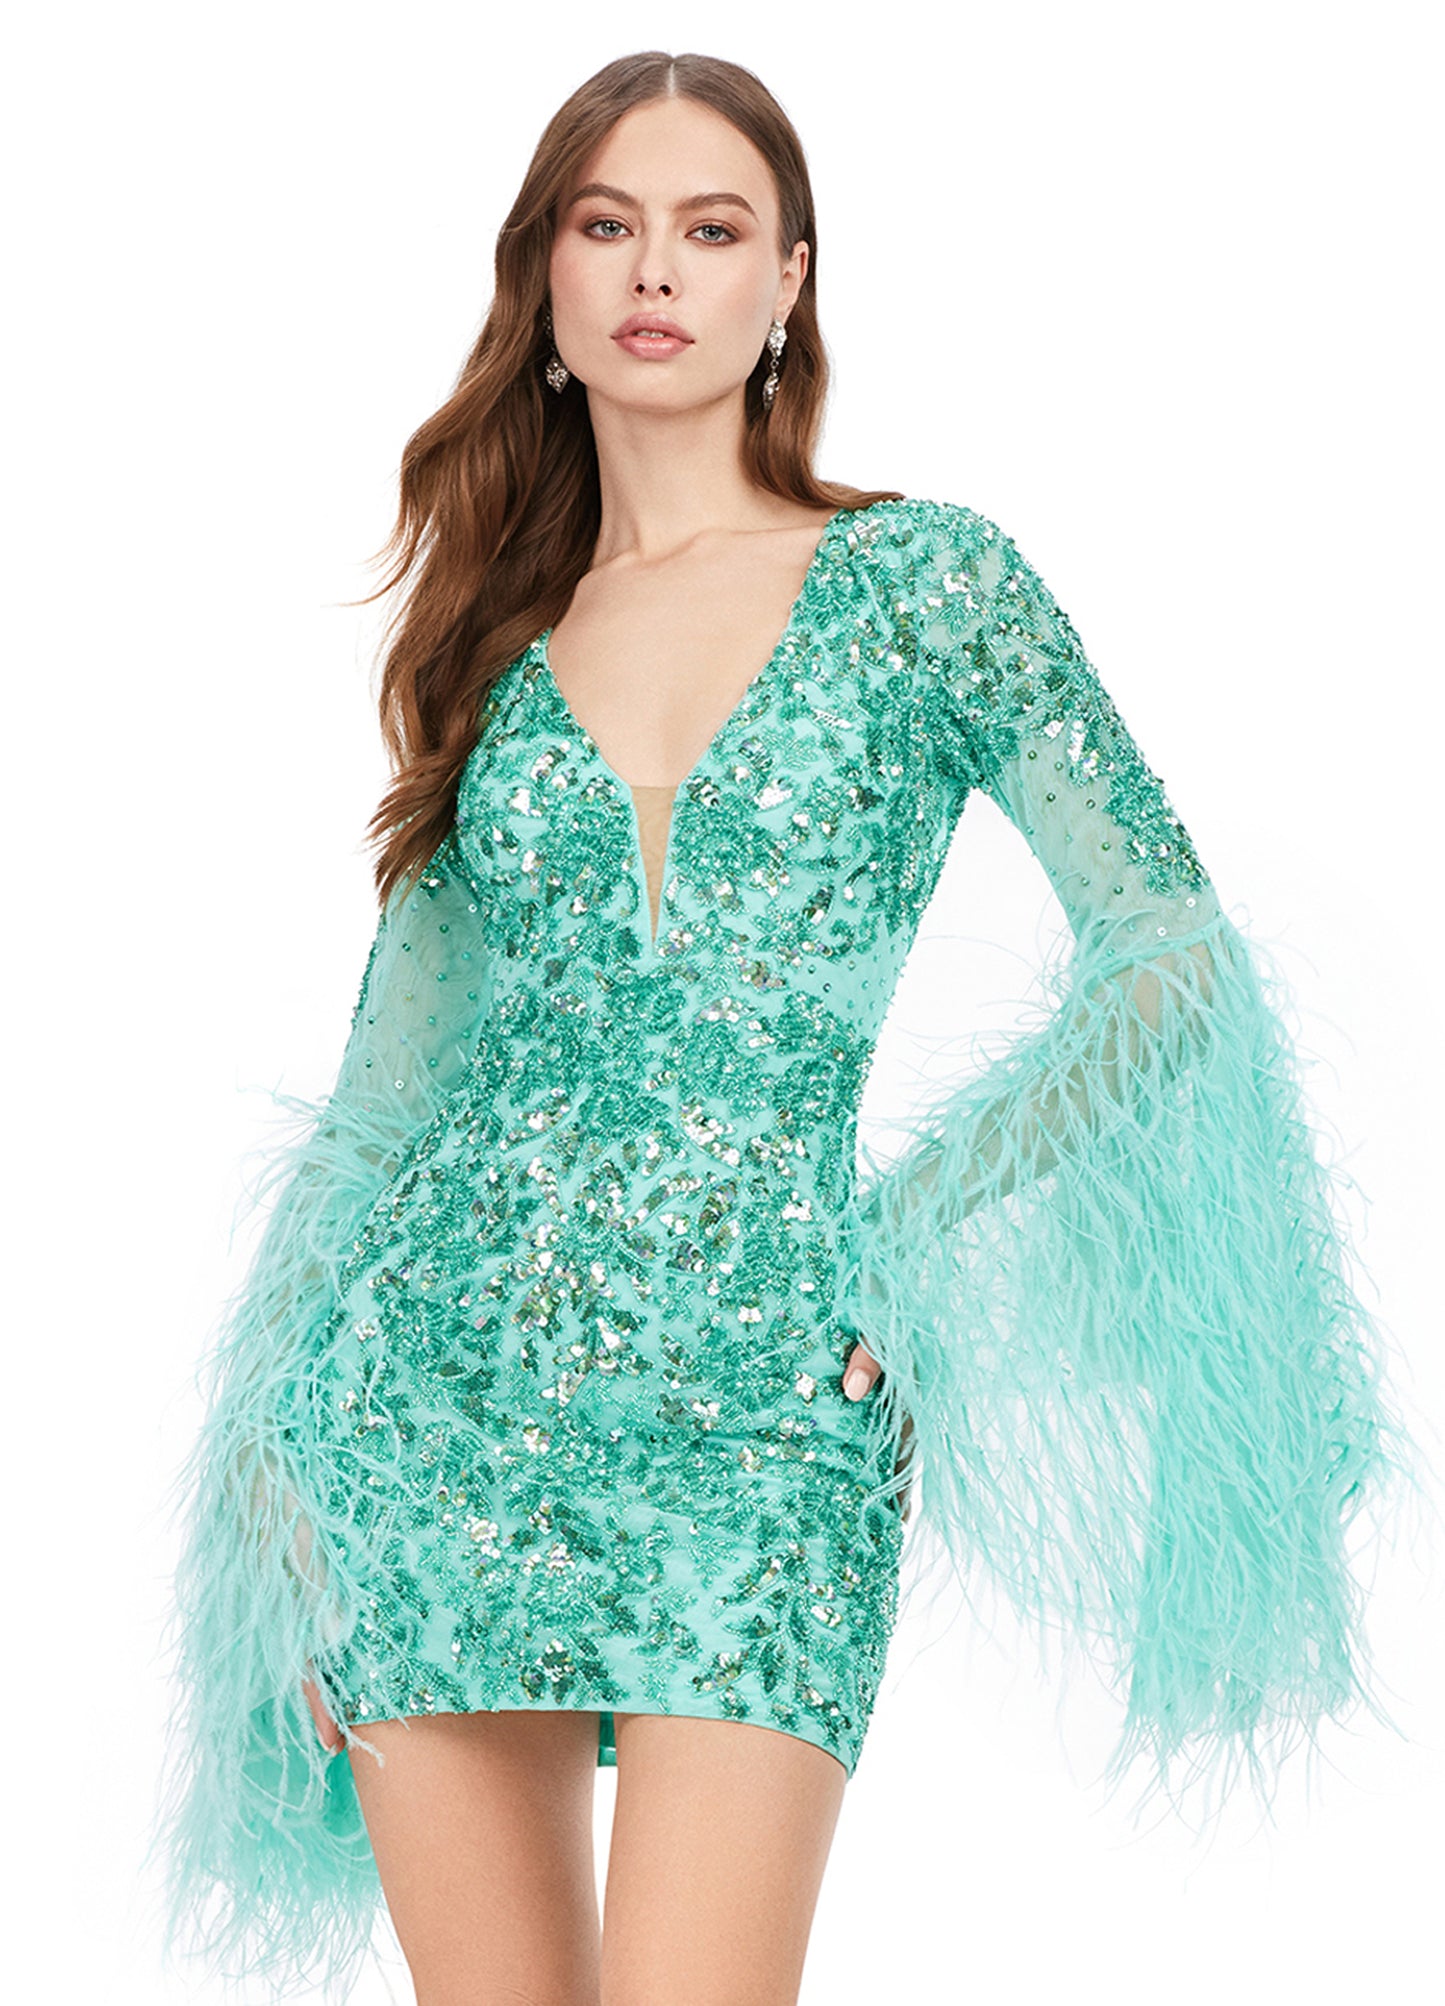 Ashley Lauren 4603 Short Beaded Sequin Long Feather Bell Sleeve Formal Dress Cocktail Gown Pageant Make a statement in this fully beaded cocktail dress with feather adorned flare sleeves! The look is complete with a V-neckline, full back and fitted skirt. V-Neckline Flare Feather Sleeves Fitted Skirt Fully Beaded Sizes: 0-18 Colors: Aqua, Black, Candy Pink, Orchid, Red